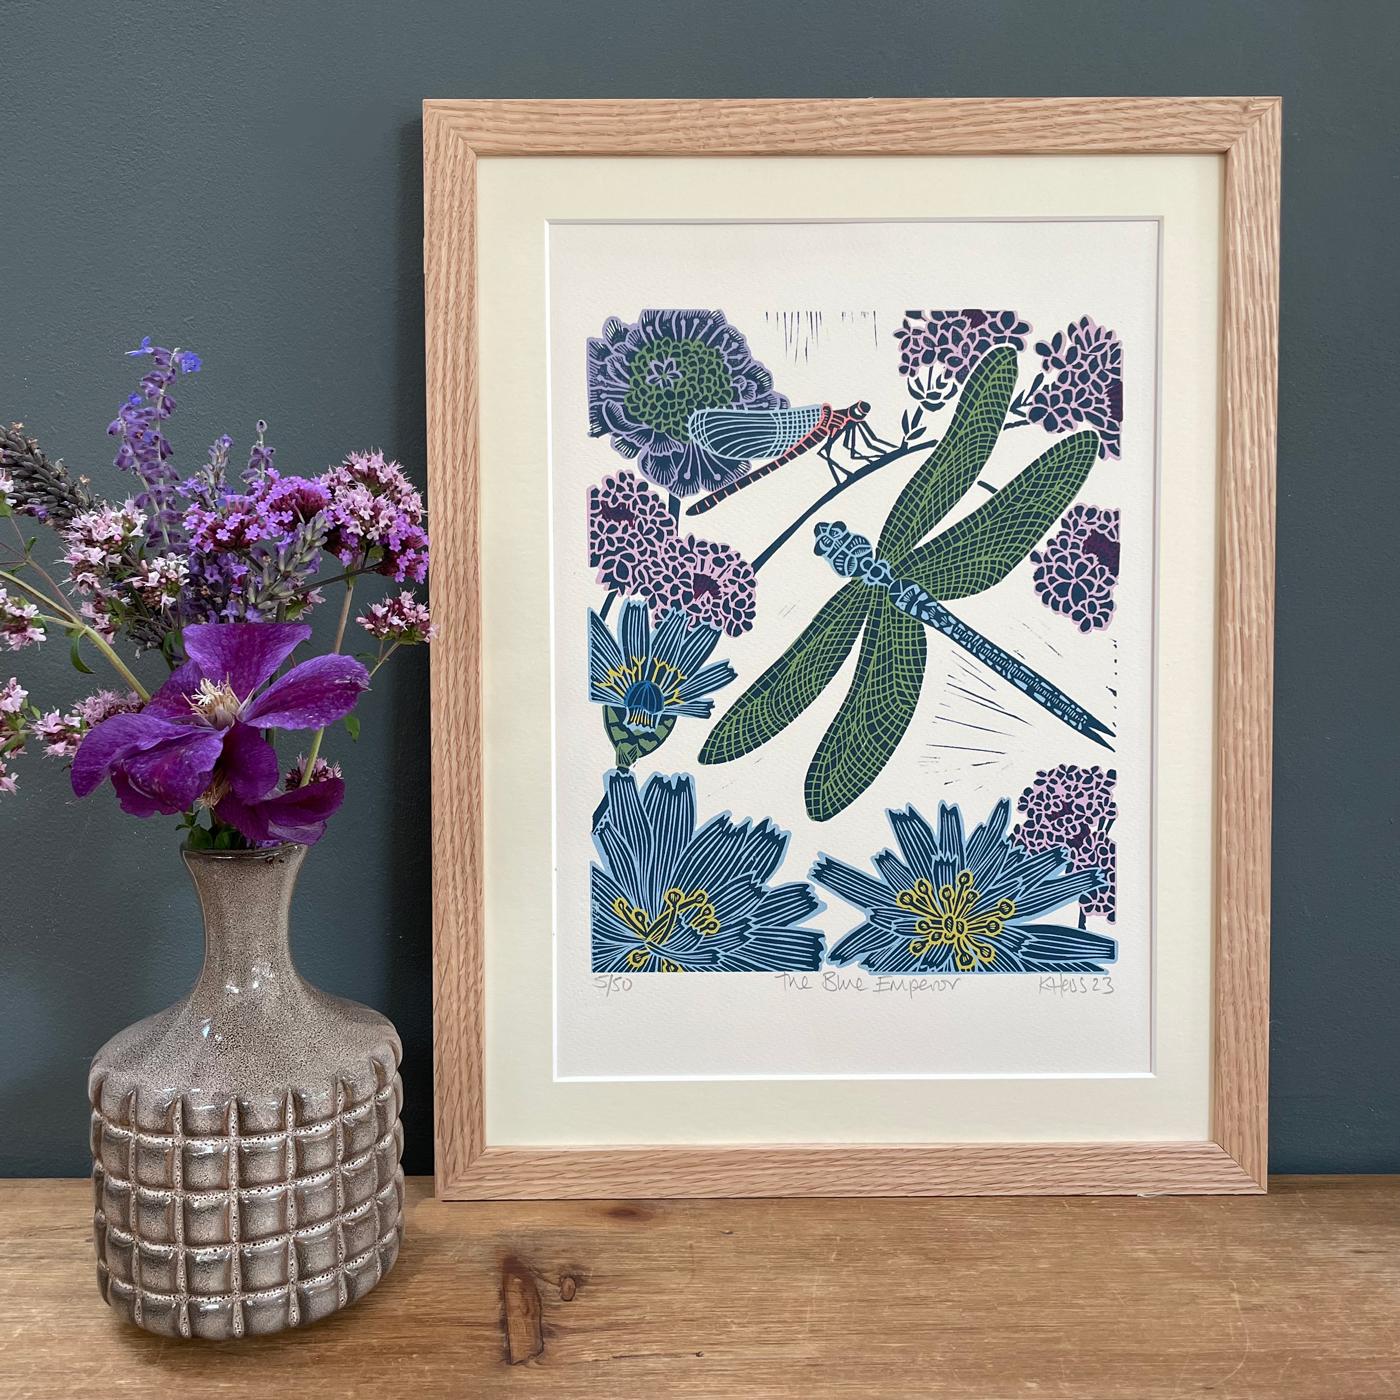 Blue Emperor, Linocut, Limited edition print, Dragonfly, Nature, Floral, Purple For Sale 8